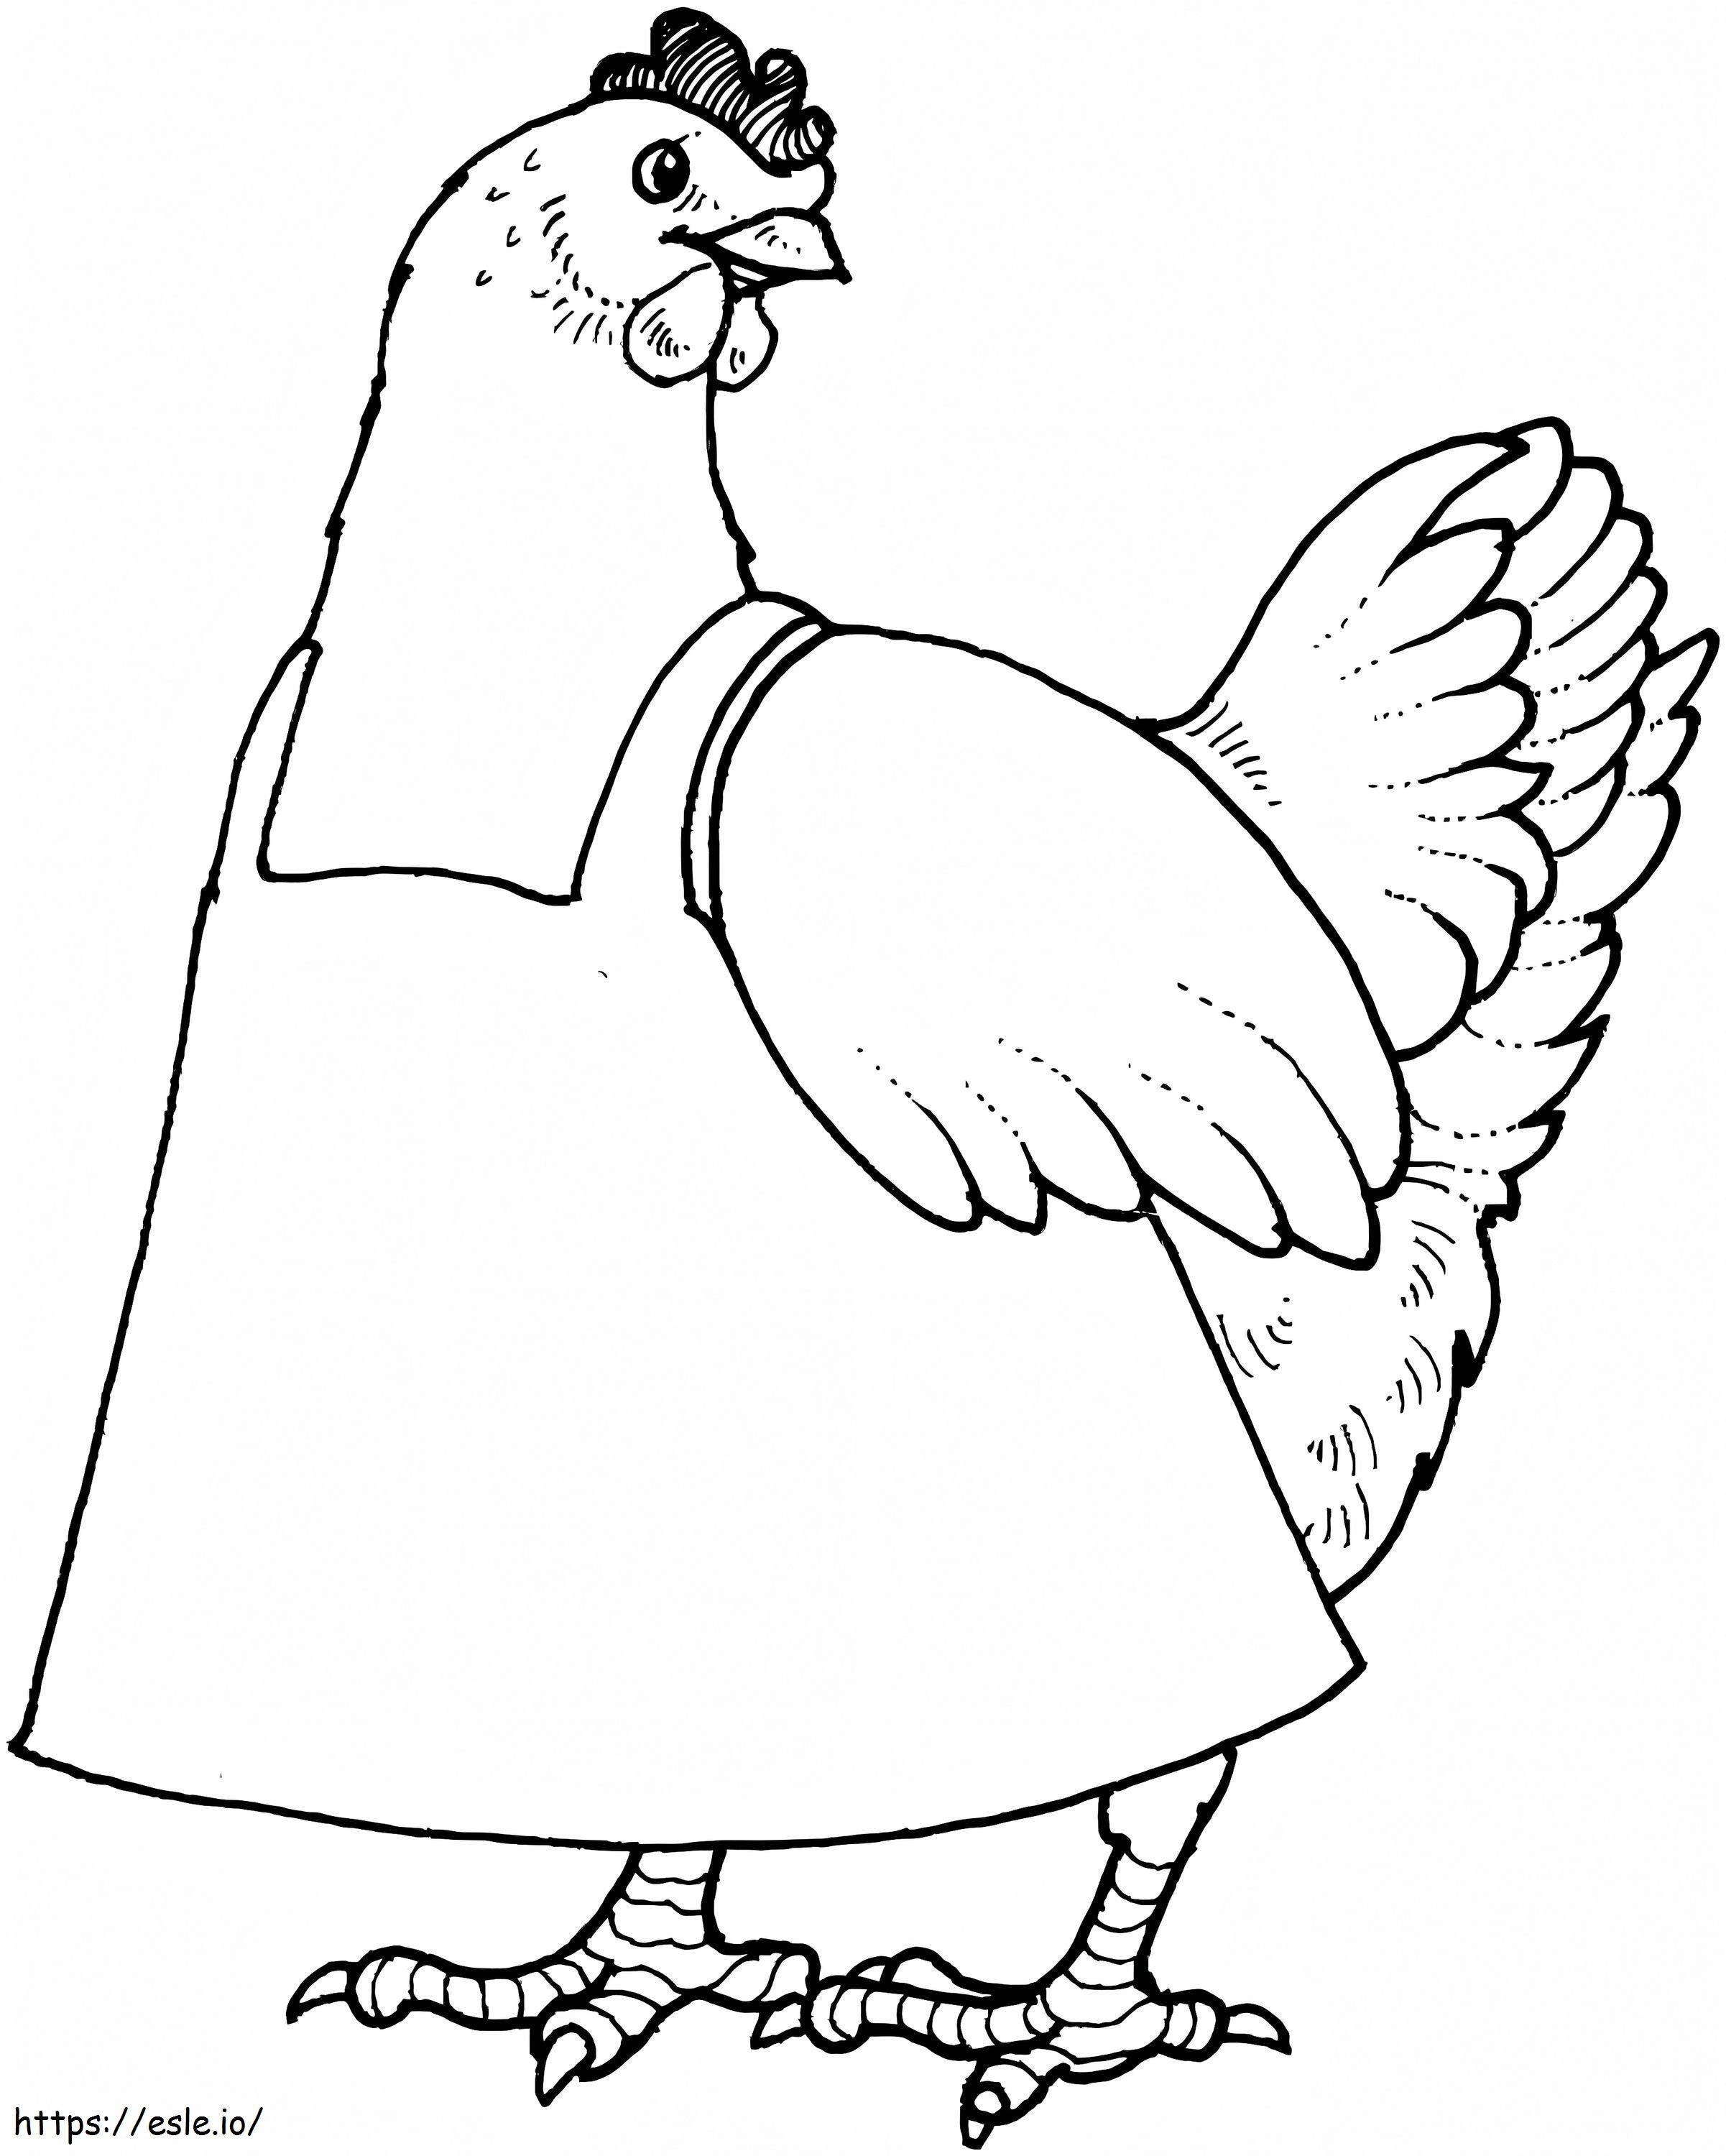 Mother Hen coloring page